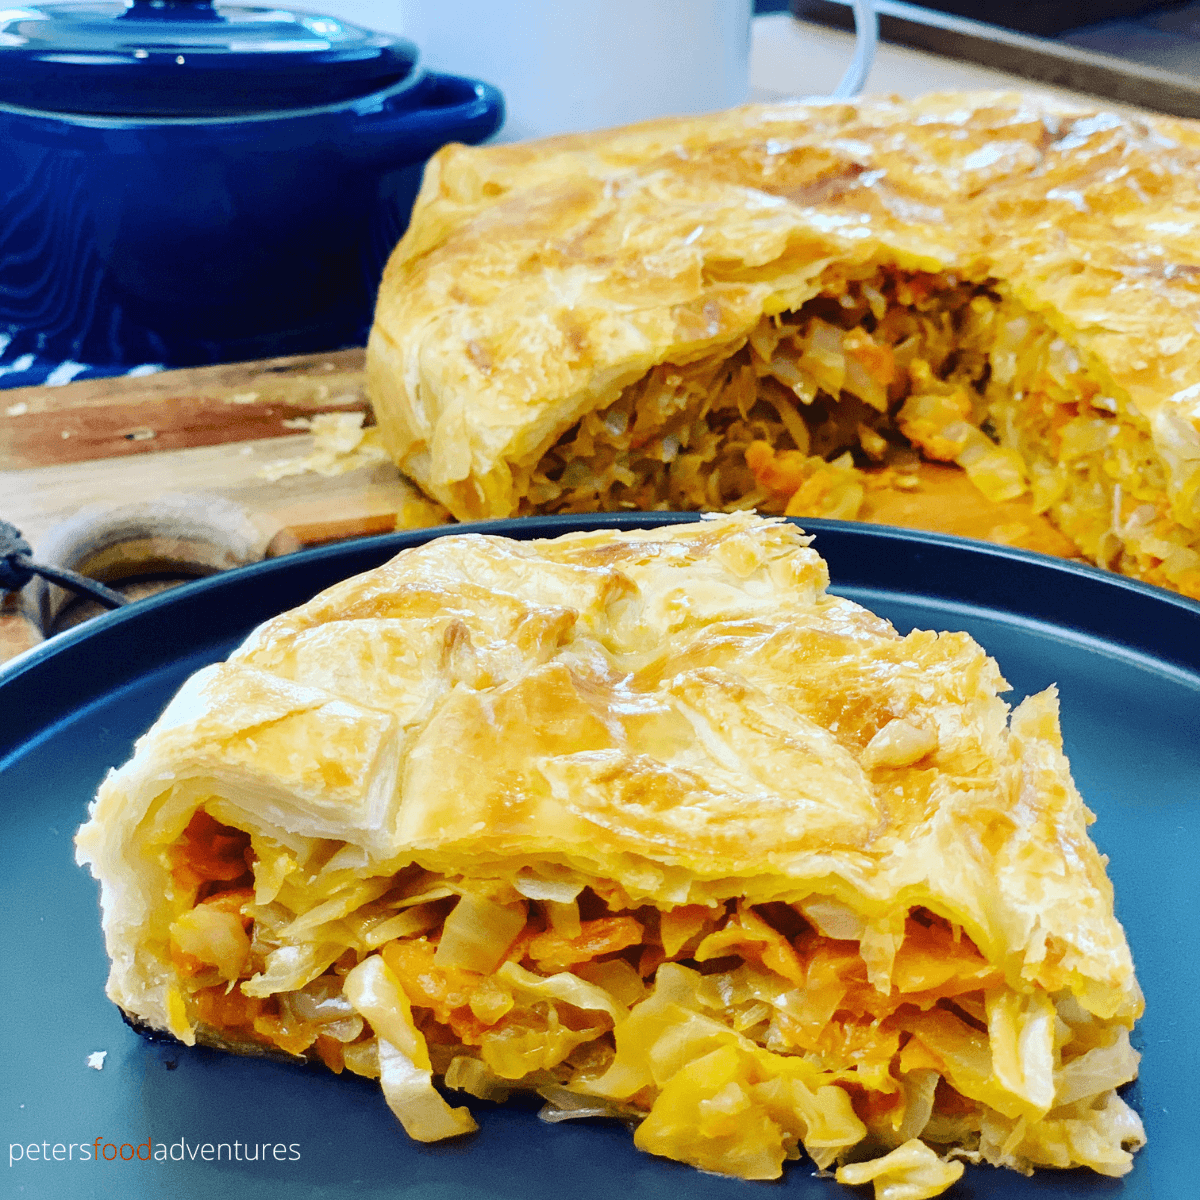 A Russian Cabbage Pie that is easy to make using a puff pastry shortcut. Stuffed with butter braised cabbage. A tasty vegetarian meal that’s perfect for lunch or dinner!